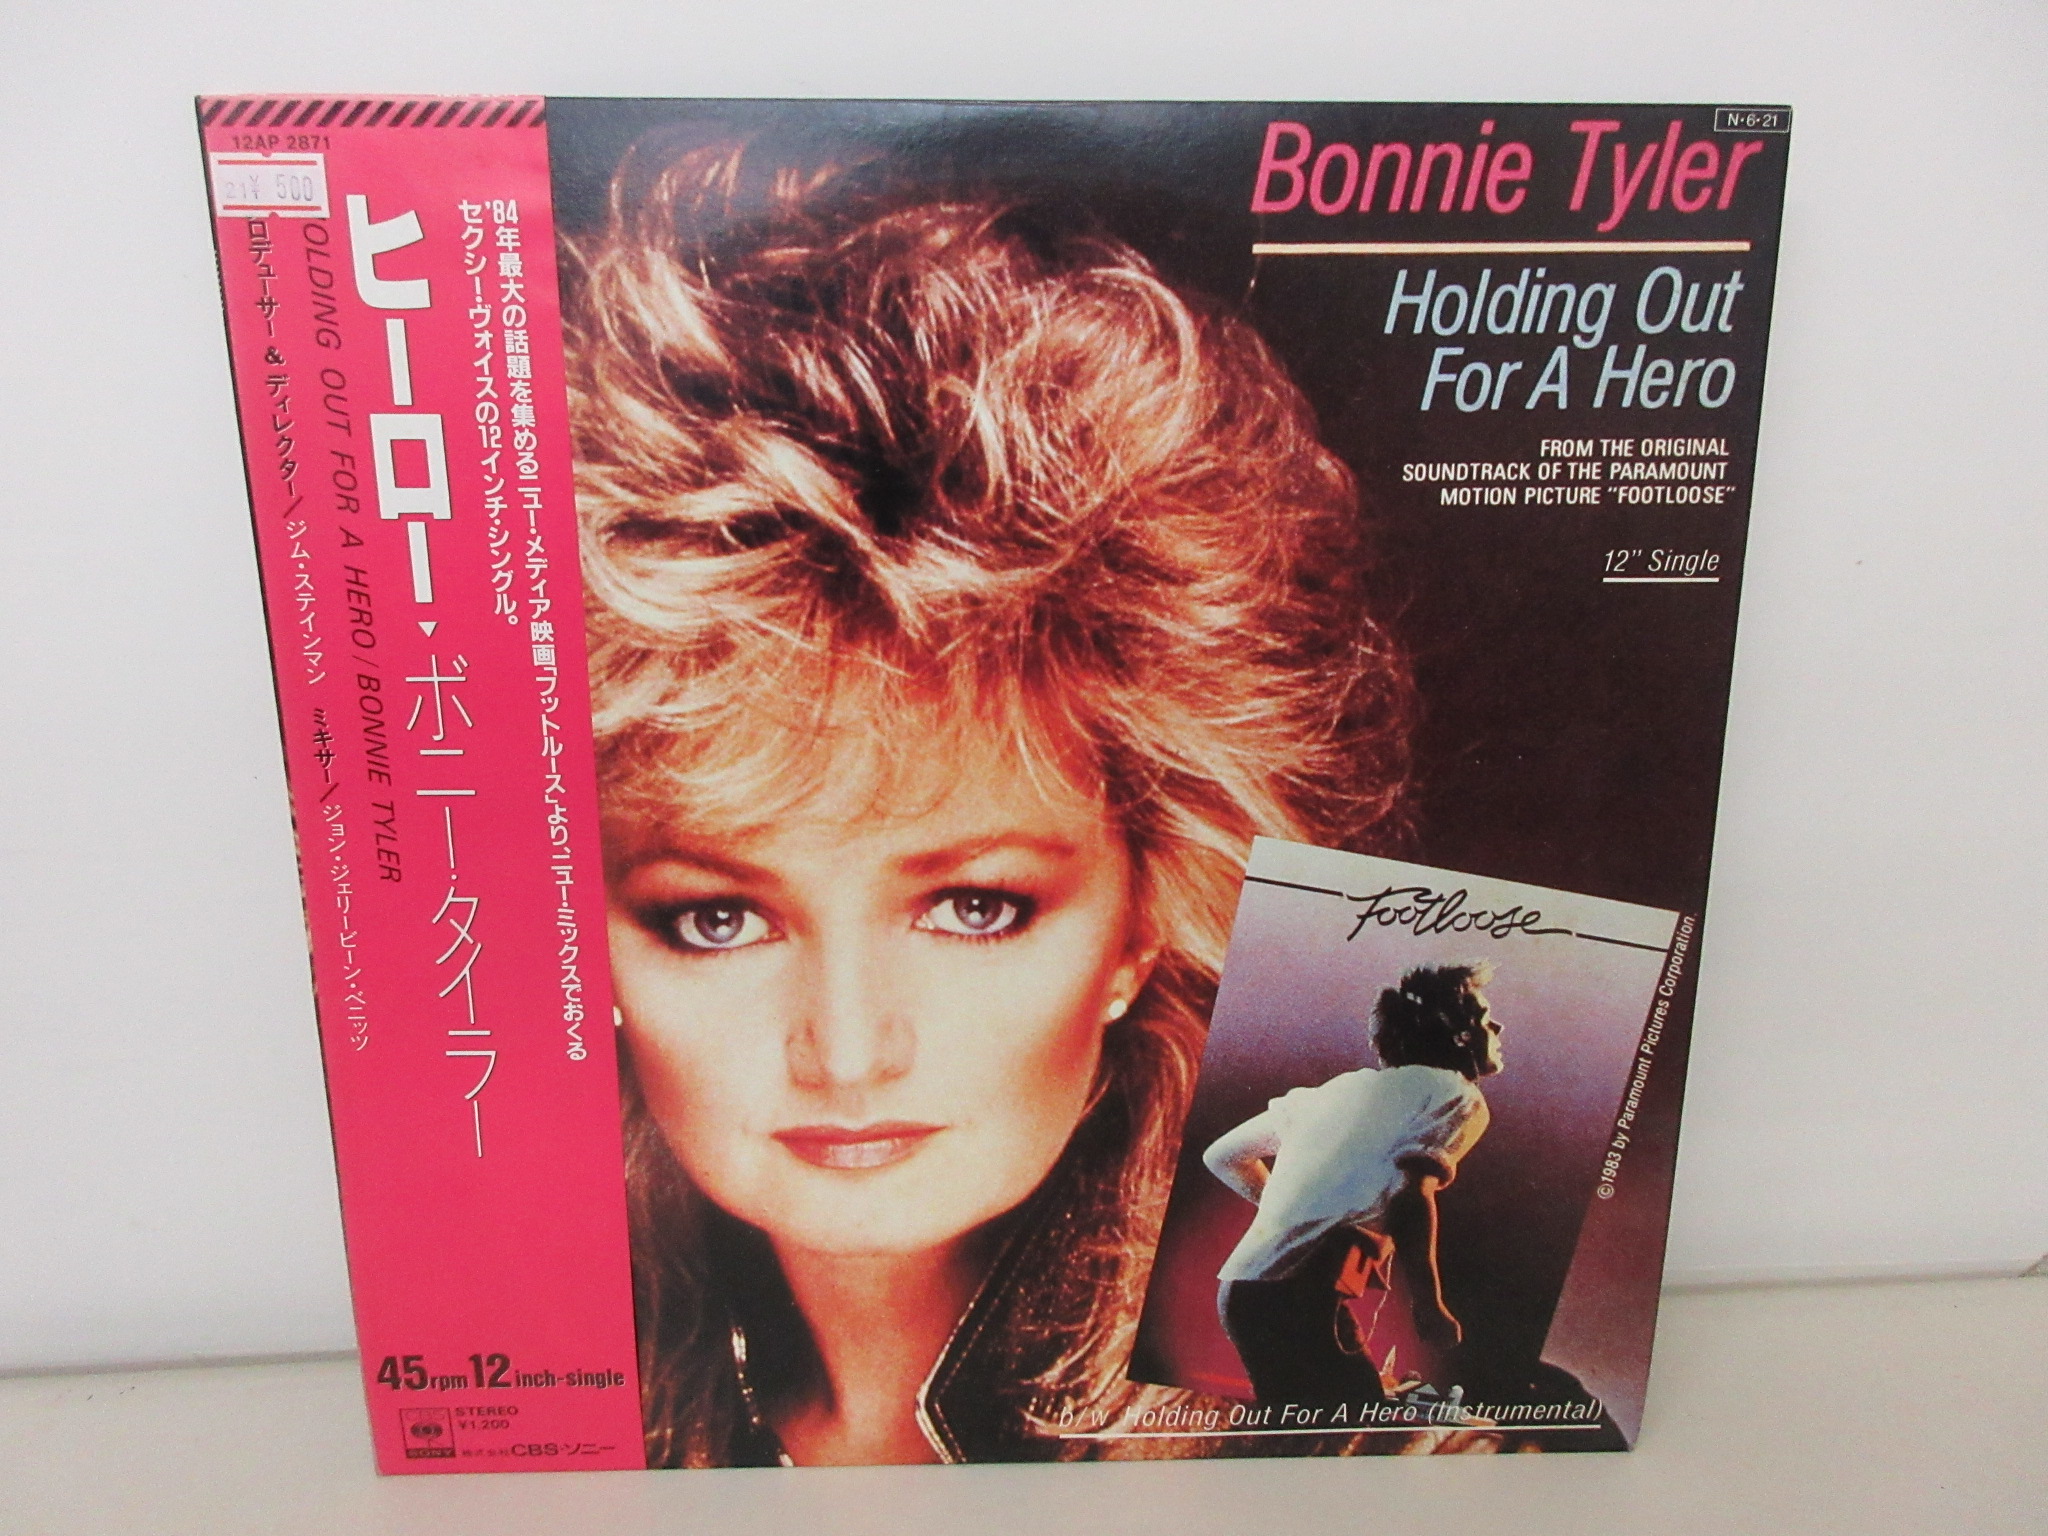 Bonnie Tyler - Holding Out For A Hero  ボニー・ラオラー　〔12AP 2871〕